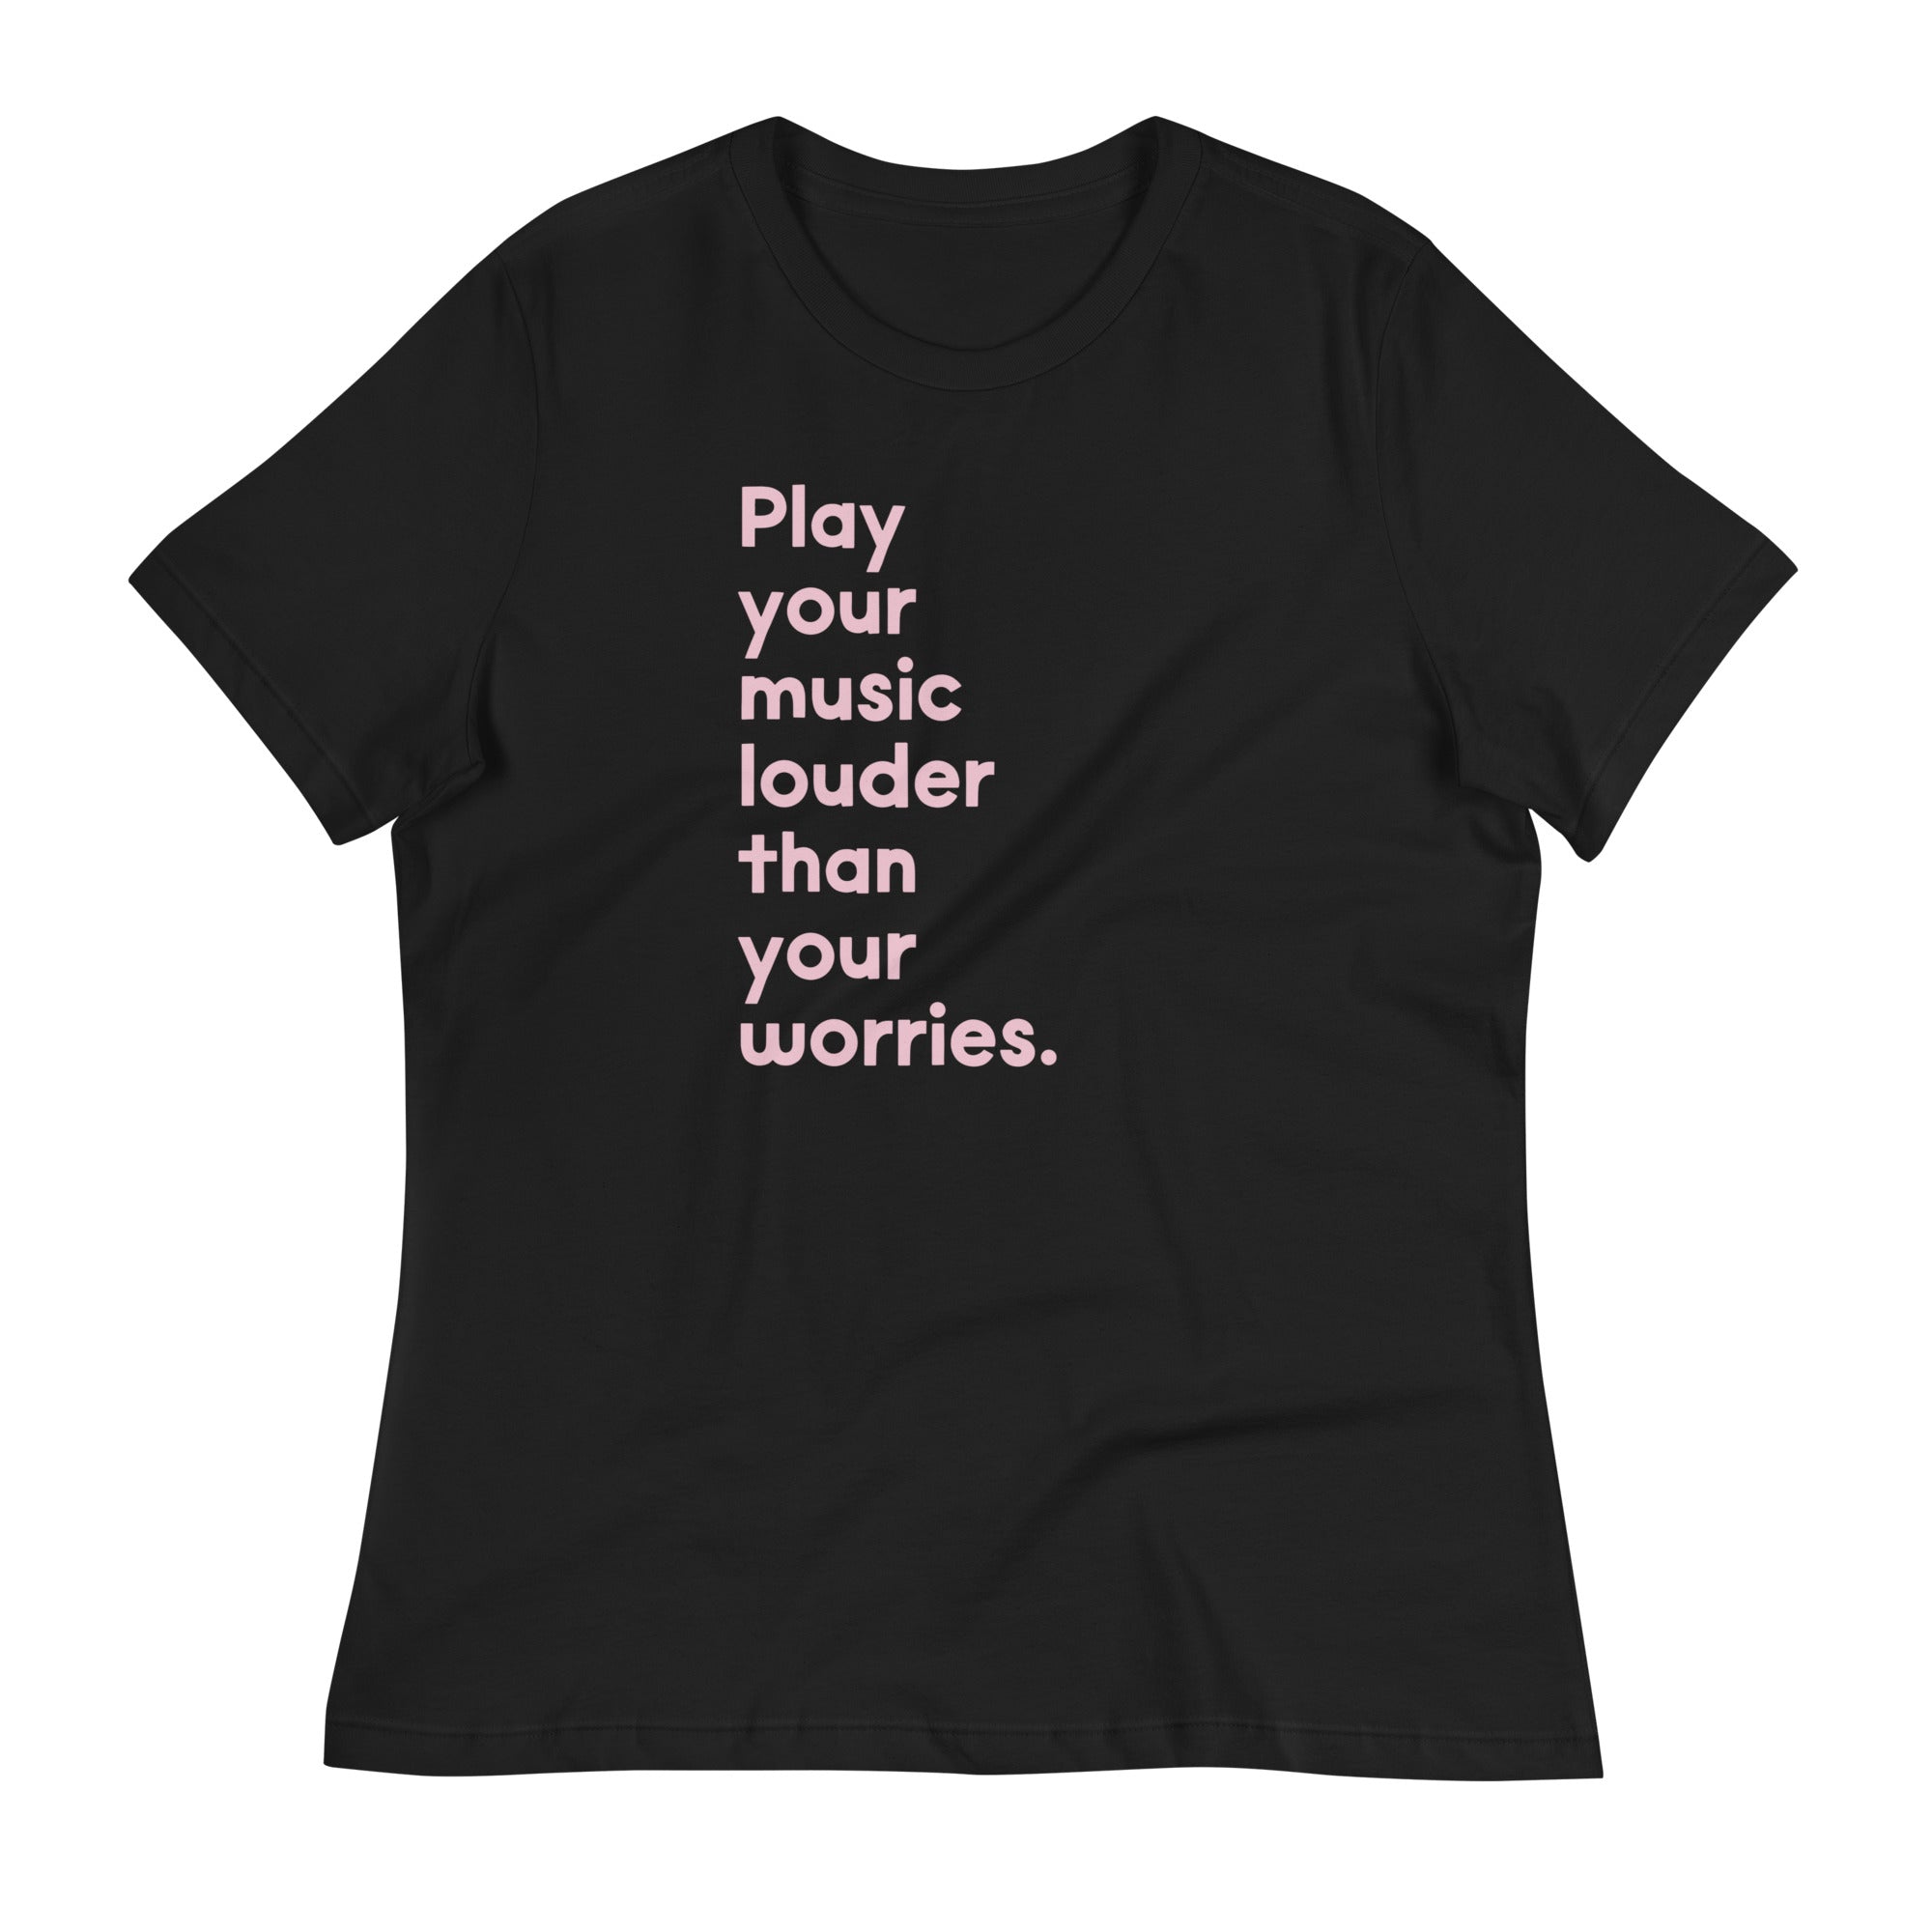 Play Your Music Louder Than Your Worries - Women's Fit T-Shirt